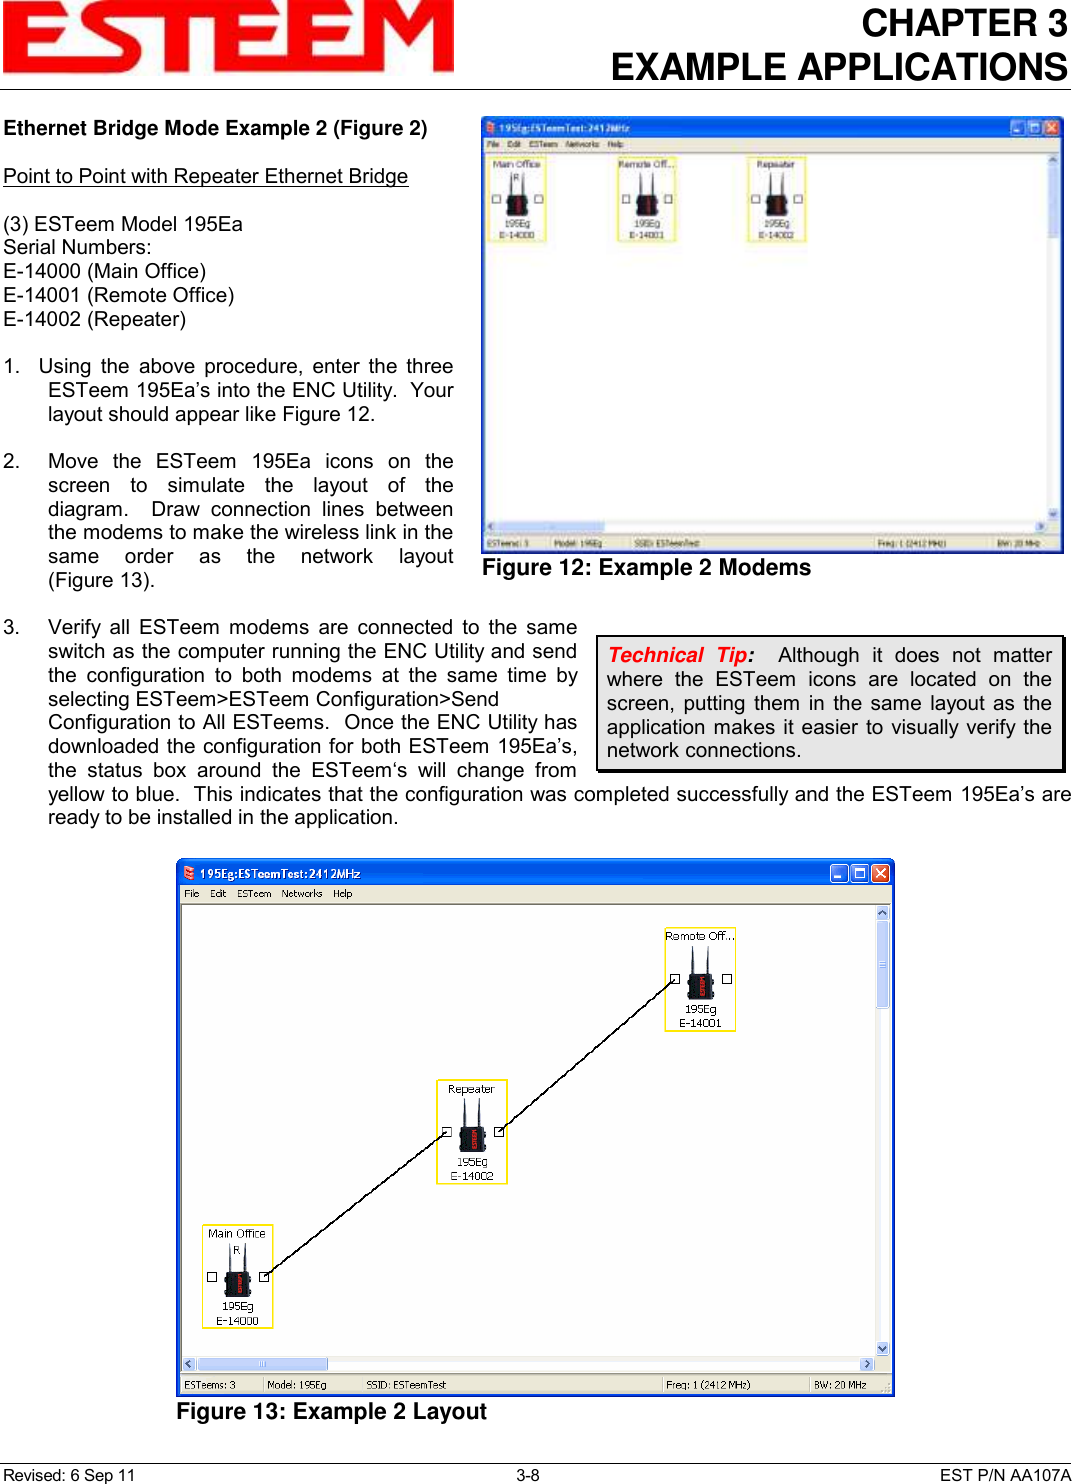 CHAPTER 3 EXAMPLE APPLICATIONS  Revised: 6 Sep 11  3-8  EST P/N AA107A Ethernet Bridge Mode Example 2 (Figure 2)  Point to Point with Repeater Ethernet Bridge  (3) ESTeem Model 195Ea Serial Numbers: E-14000 (Main Office) E-14001 (Remote Office) E-14002 (Repeater)  1.    Using  the  above  procedure,  enter  the  three ESTeem 195Ea’s into the ENC Utility.  Your layout should appear like Figure 12.   2.    Move  the  ESTeem  195Ea  icons  on  the screen  to  simulate  the  layout  of  the diagram.    Draw  connection  lines  between the modems to make the wireless link in the same  order  as  the  network  layout (Figure 13).  3.    Verify  all  ESTeem  modems  are  connected  to  the  same switch as the computer running the ENC Utility and send the  configuration  to  both  modems  at  the  same  time  by selecting ESTeem&gt;ESTeem Configuration&gt;Send Configuration to All ESTeems.  Once the ENC Utility has downloaded the configuration for both ESTeem 195Ea’s, the  status  box  around  the  ESTeem‘s  will  change  from yellow to blue.  This indicates that the configuration was completed successfully and the ESTeem 195Ea’s are ready to be installed in the application. Technical  Tip:    Although  it  does  not  matter where  the  ESTeem  icons  are  located  on  the screen,  putting  them  in  the  same  layout as  the application makes  it easier to visually verify the network connections.  Figure 12: Example 2 Modems   Figure 13: Example 2 Layout  